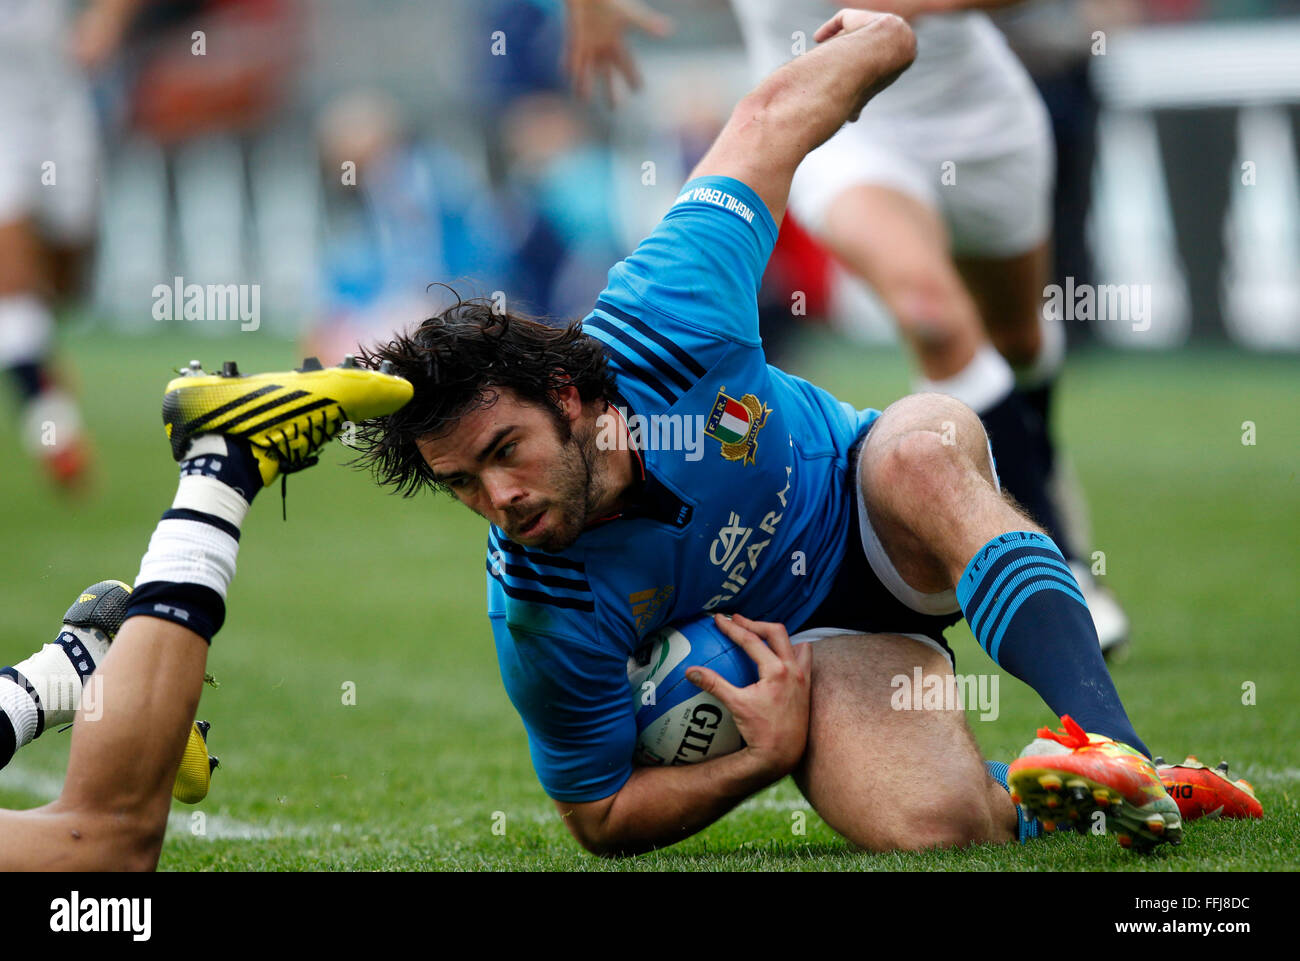 Italys Luke McLean in action during the Six Nations rugby union international match between Italy and England 